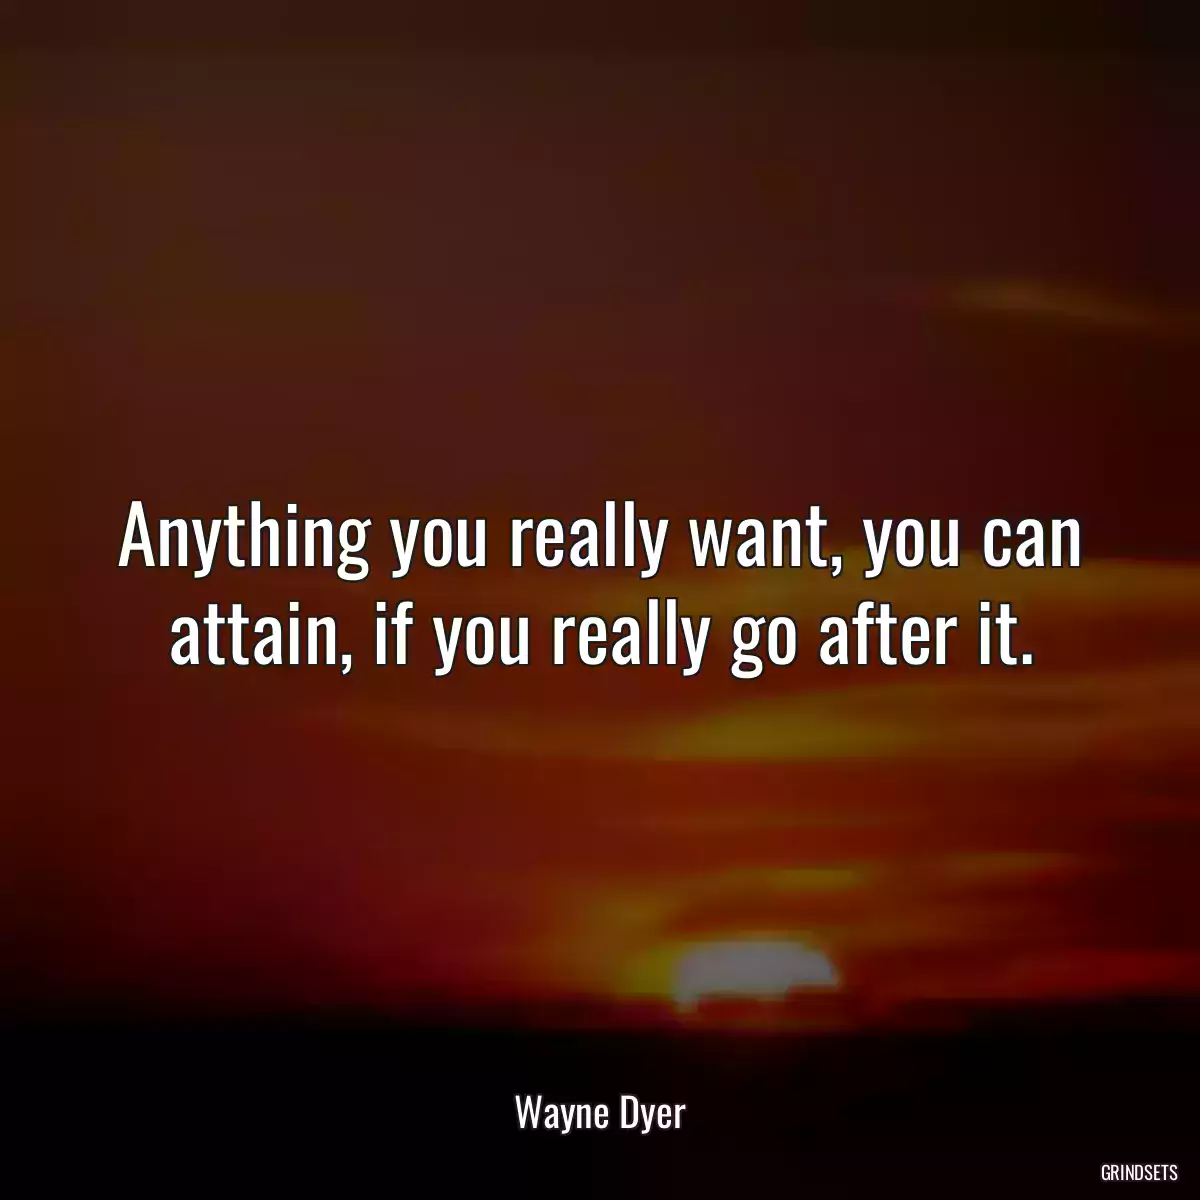 Anything you really want, you can attain, if you really go after it.